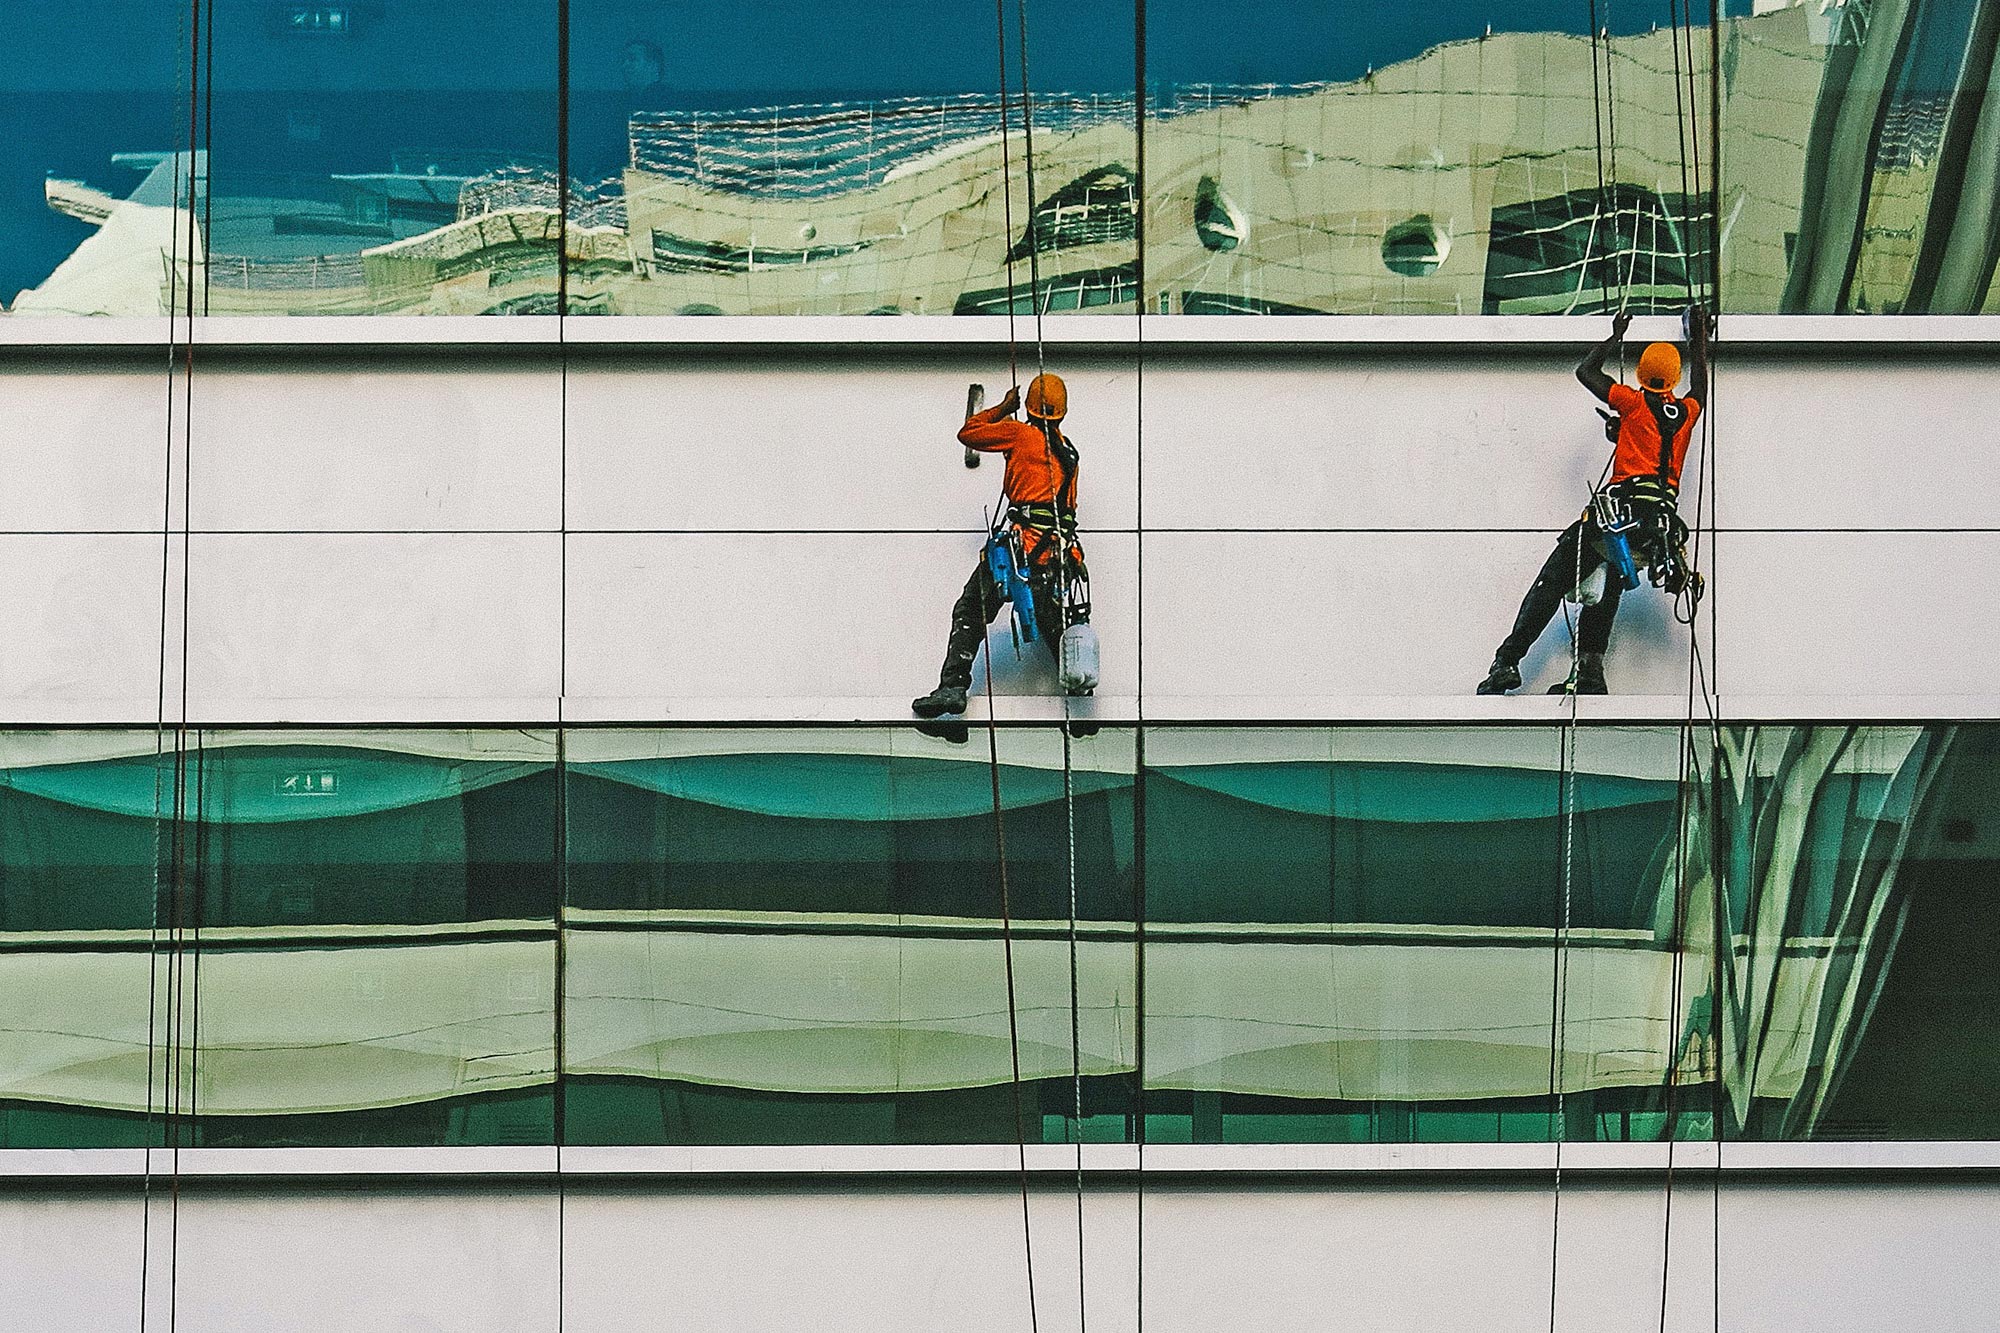 Window washers hanging off the side of a building cleaning the windows